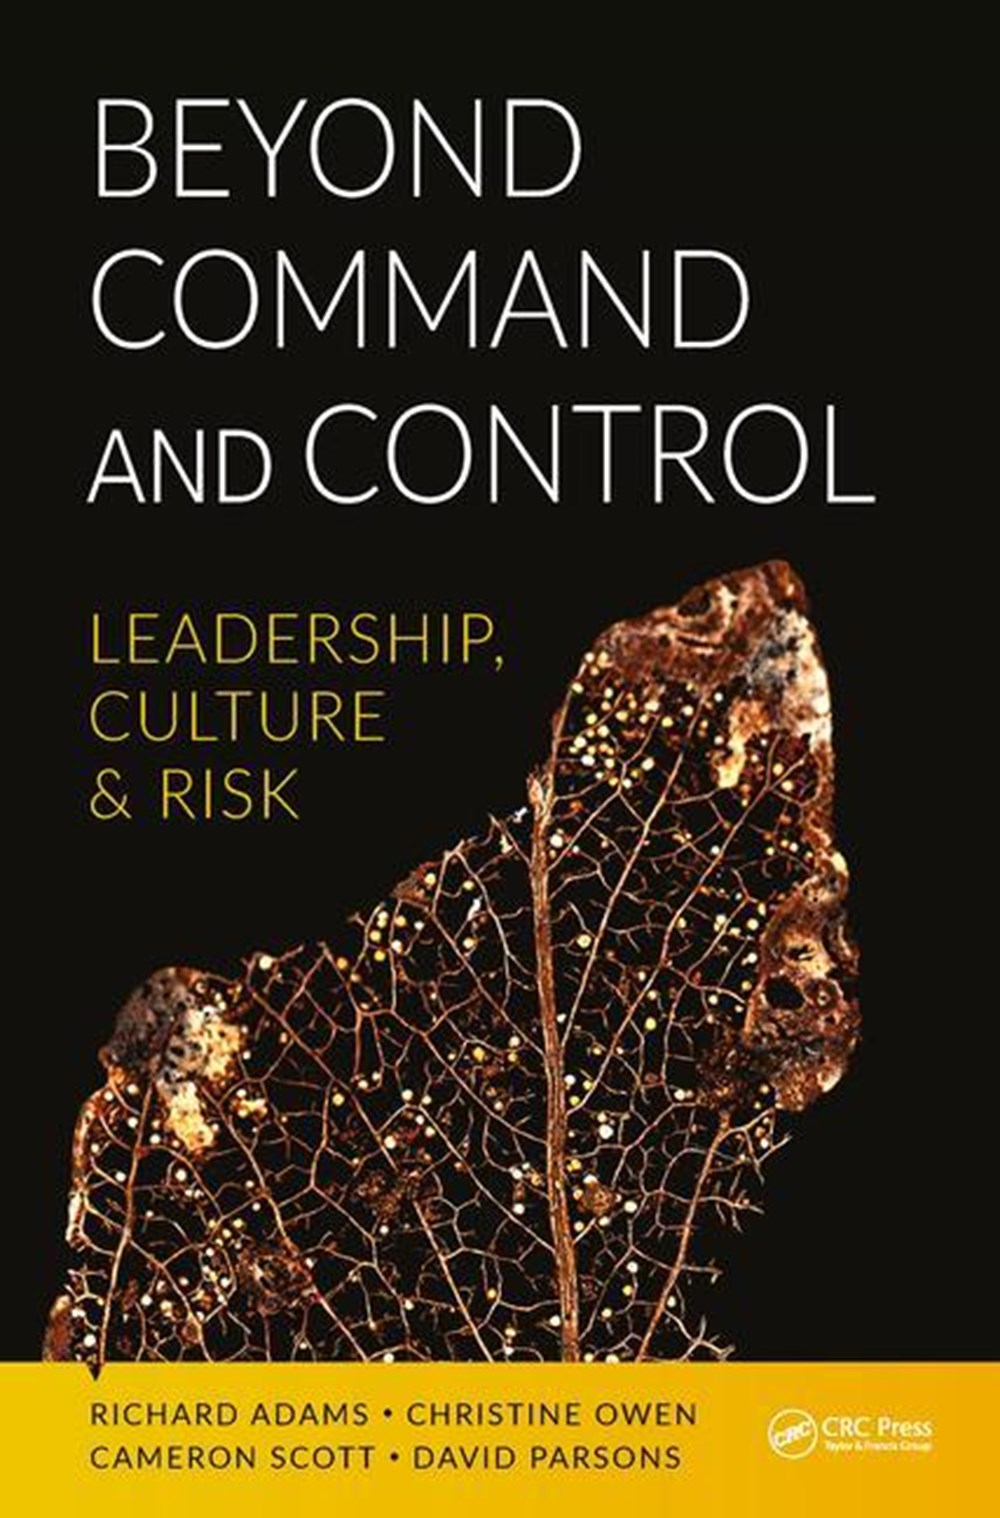 Beyond Command and Control Leadership, Culture and Risk